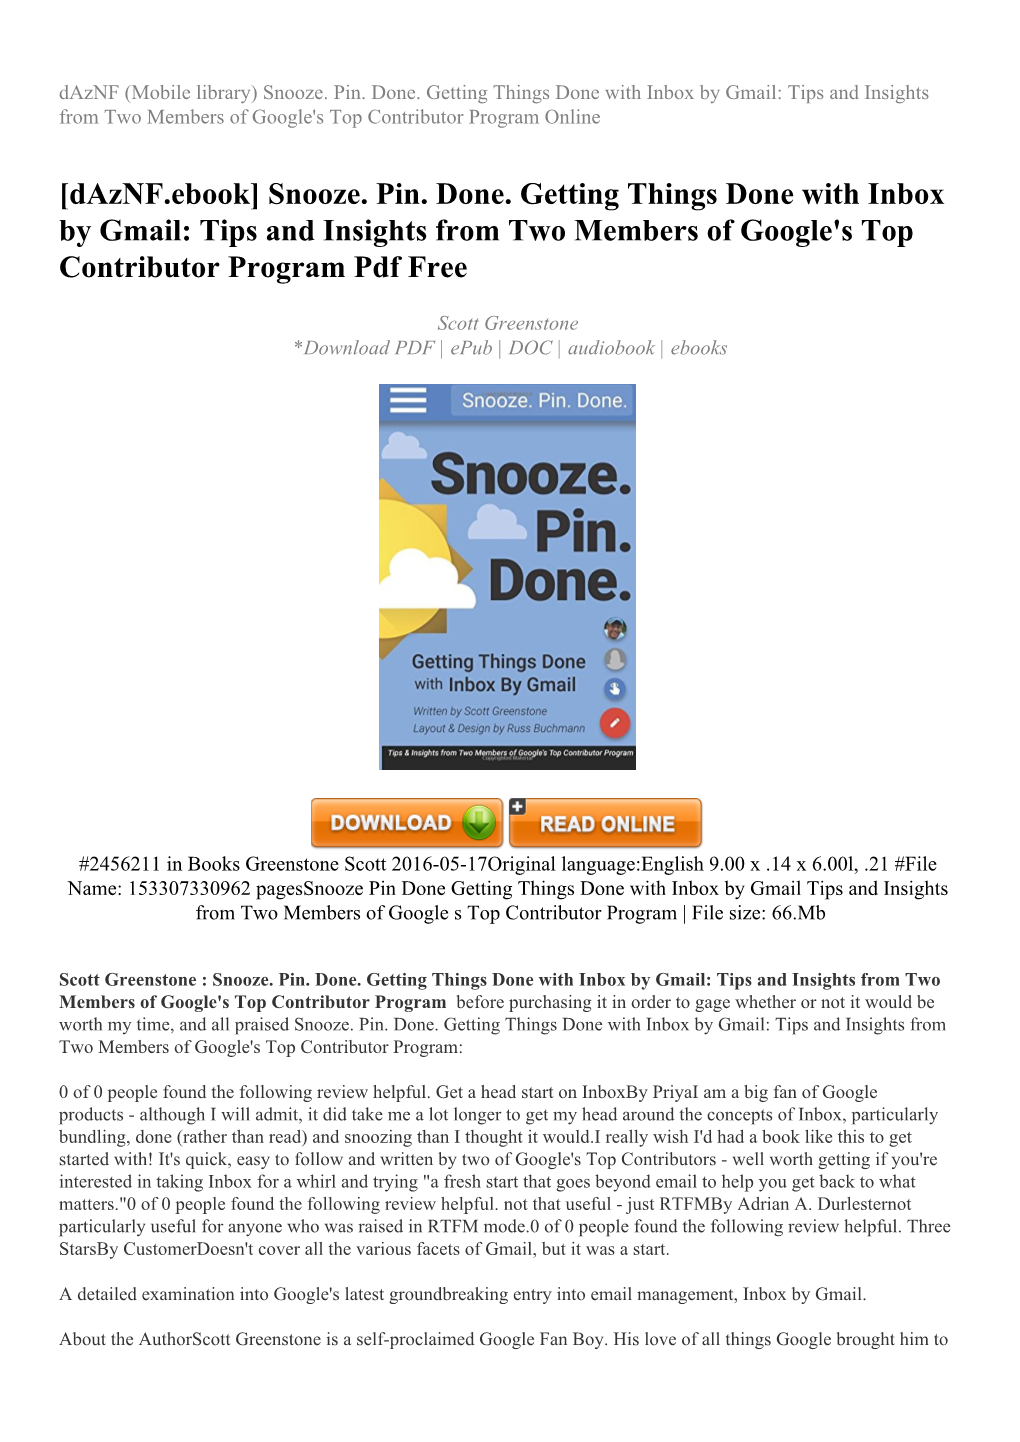 Snooze. Pin. Done. Getting Things Done with Inbox by Gmail: Tips and Insights from Two Members of Google's Top Contributor Program Online